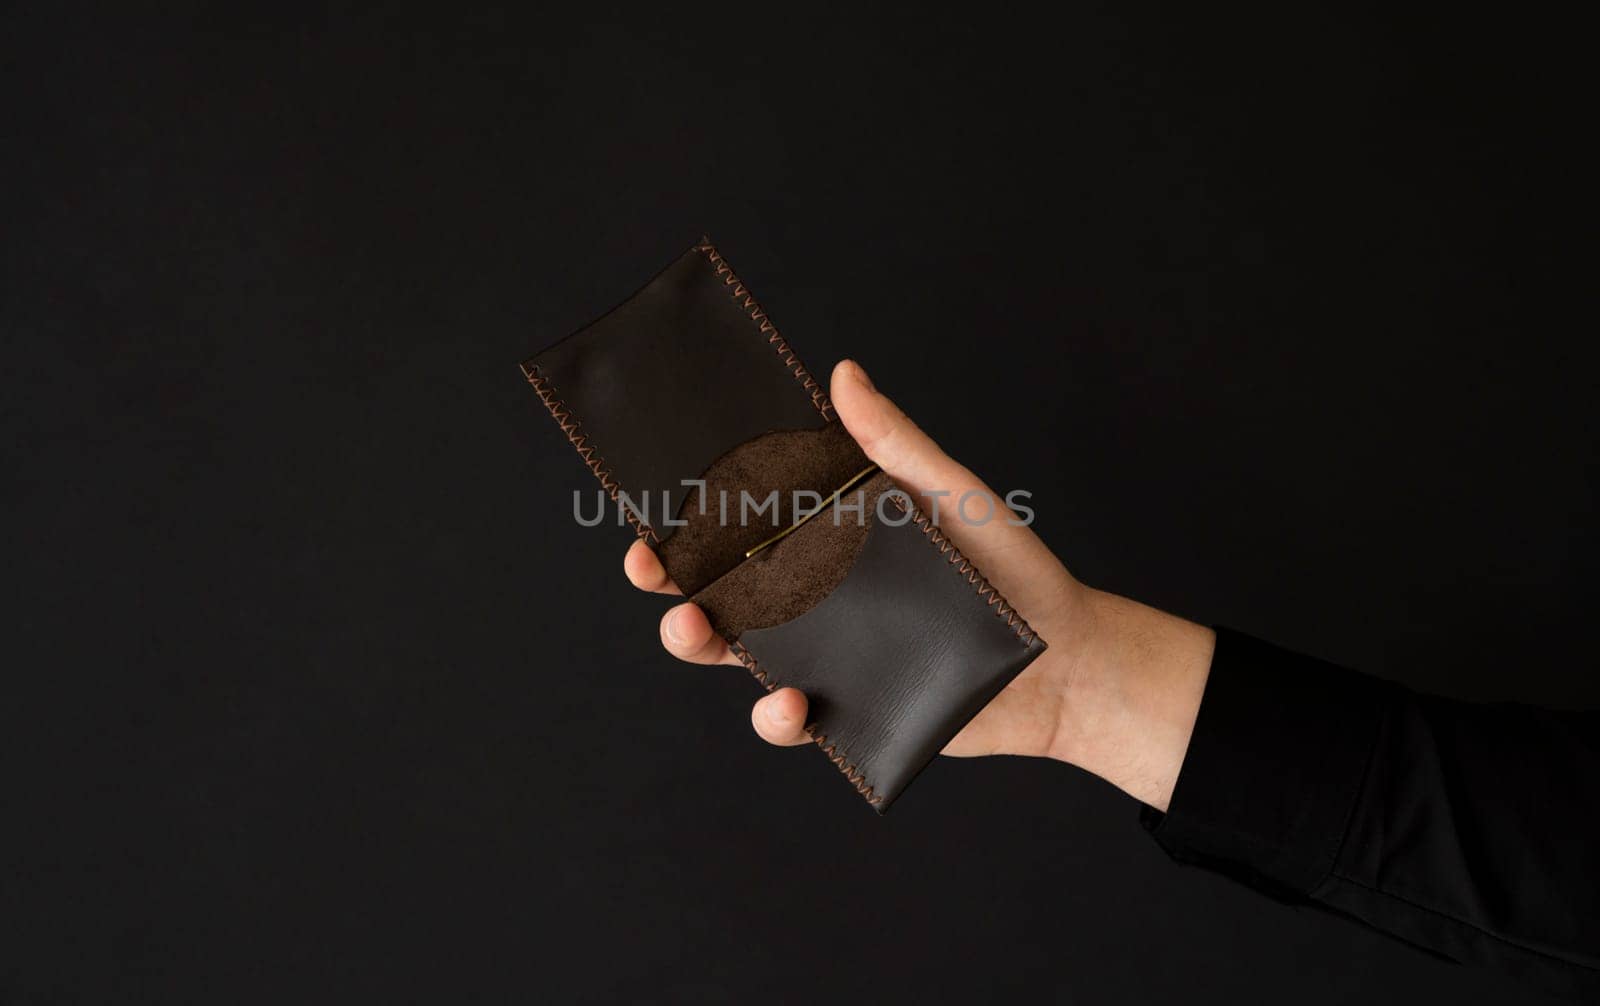 Brown empty men's business handmade leather card holder in a man's hand